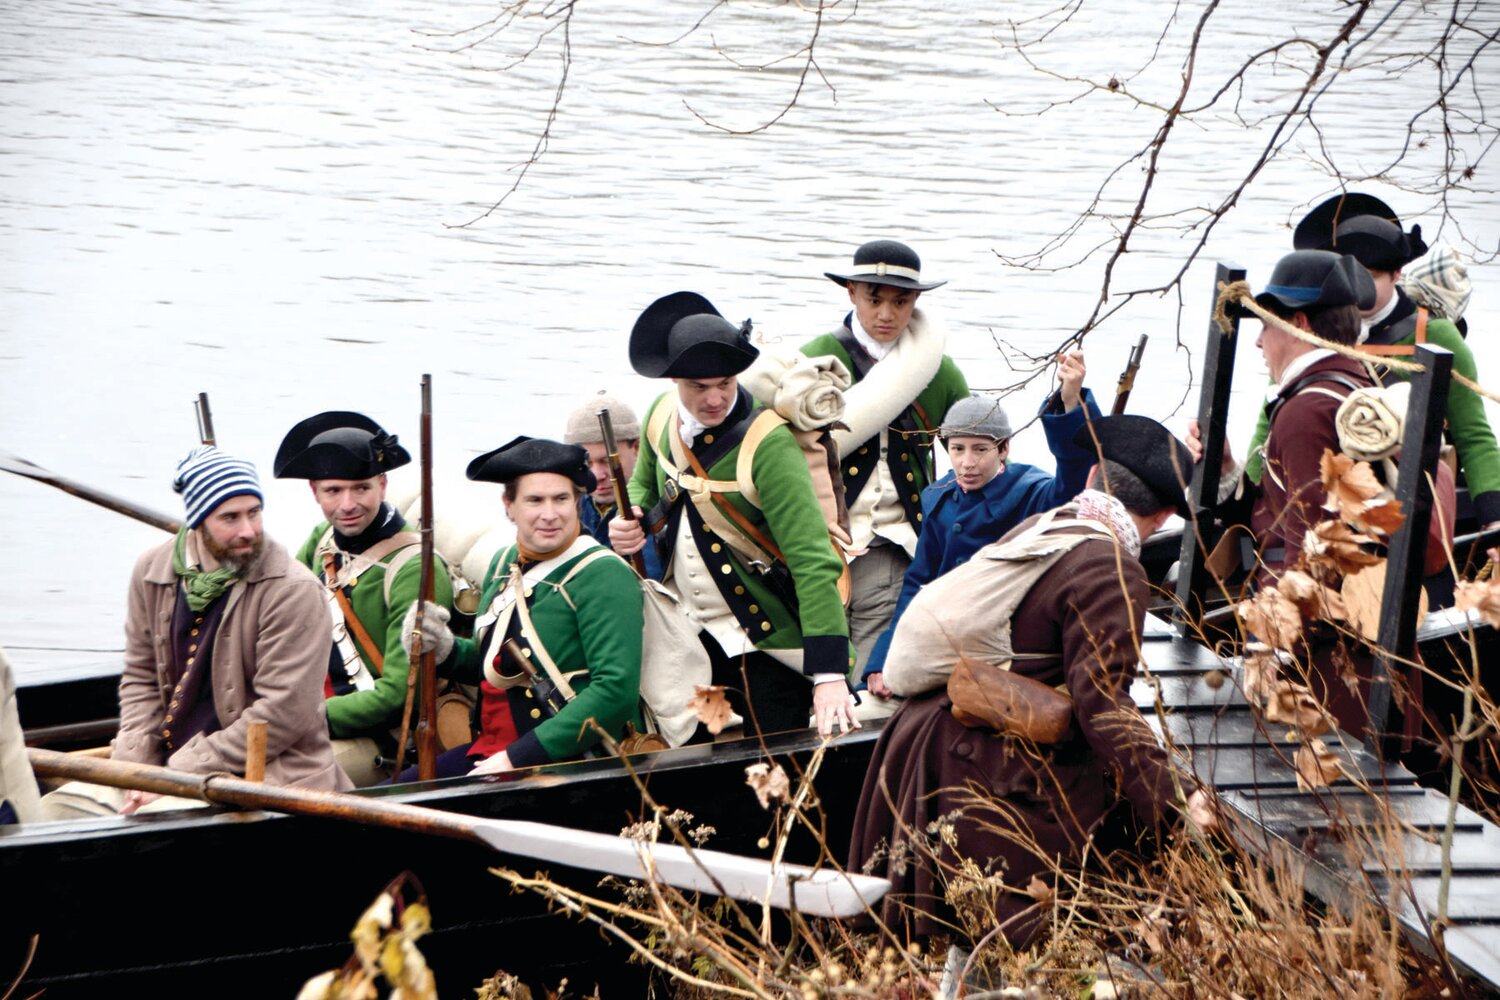 The second annual reenactment of Gen. George Washington’s troops landing in New Jersey after the Christmas night crossing in 1776 will take place Dec. 10 at Washington Crossing State Park in Titusville, N.J.